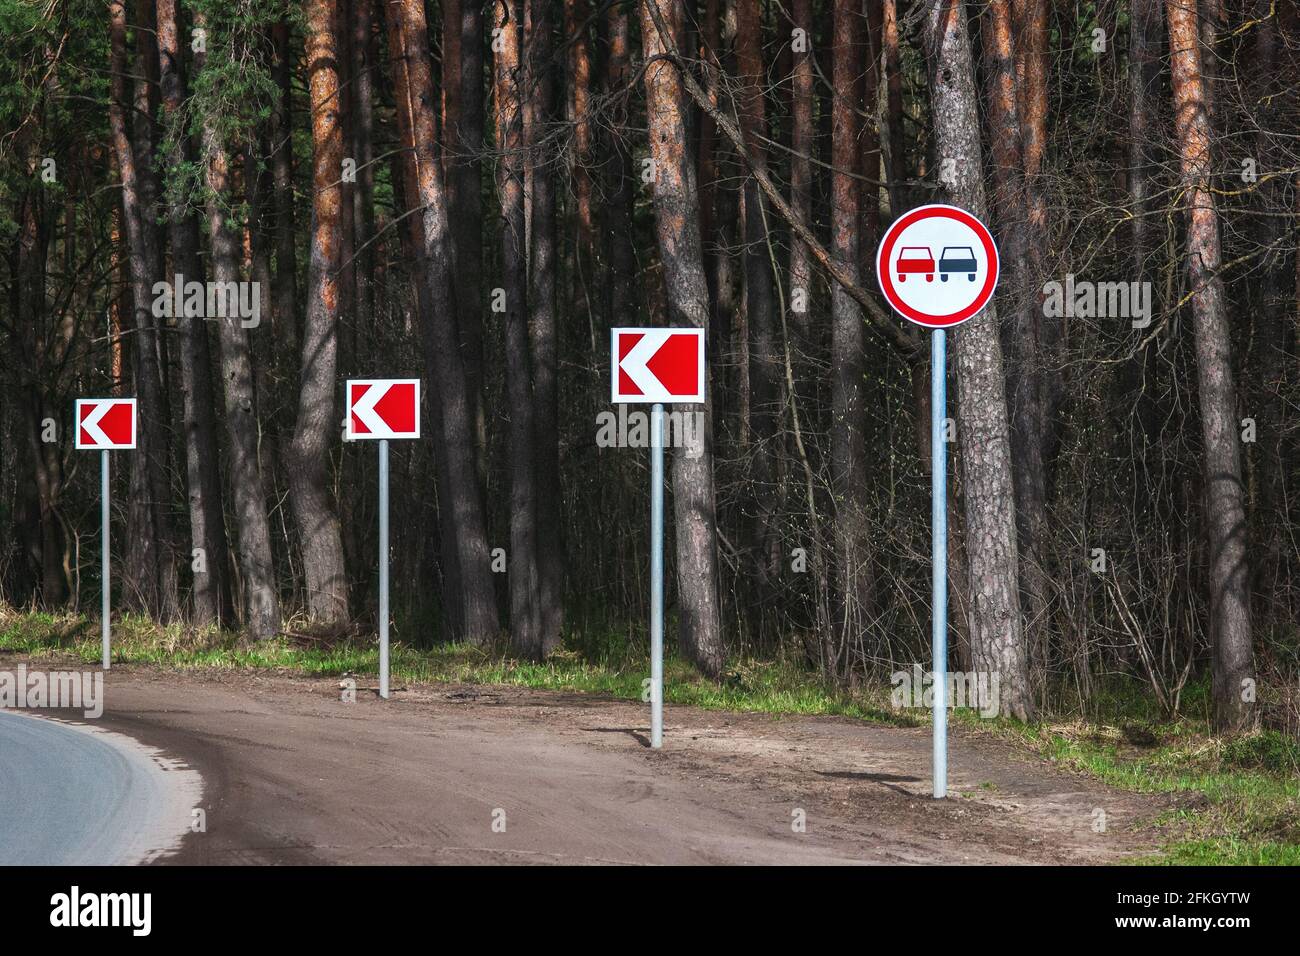 No passing road sign on winding road in the forest Stock Photo